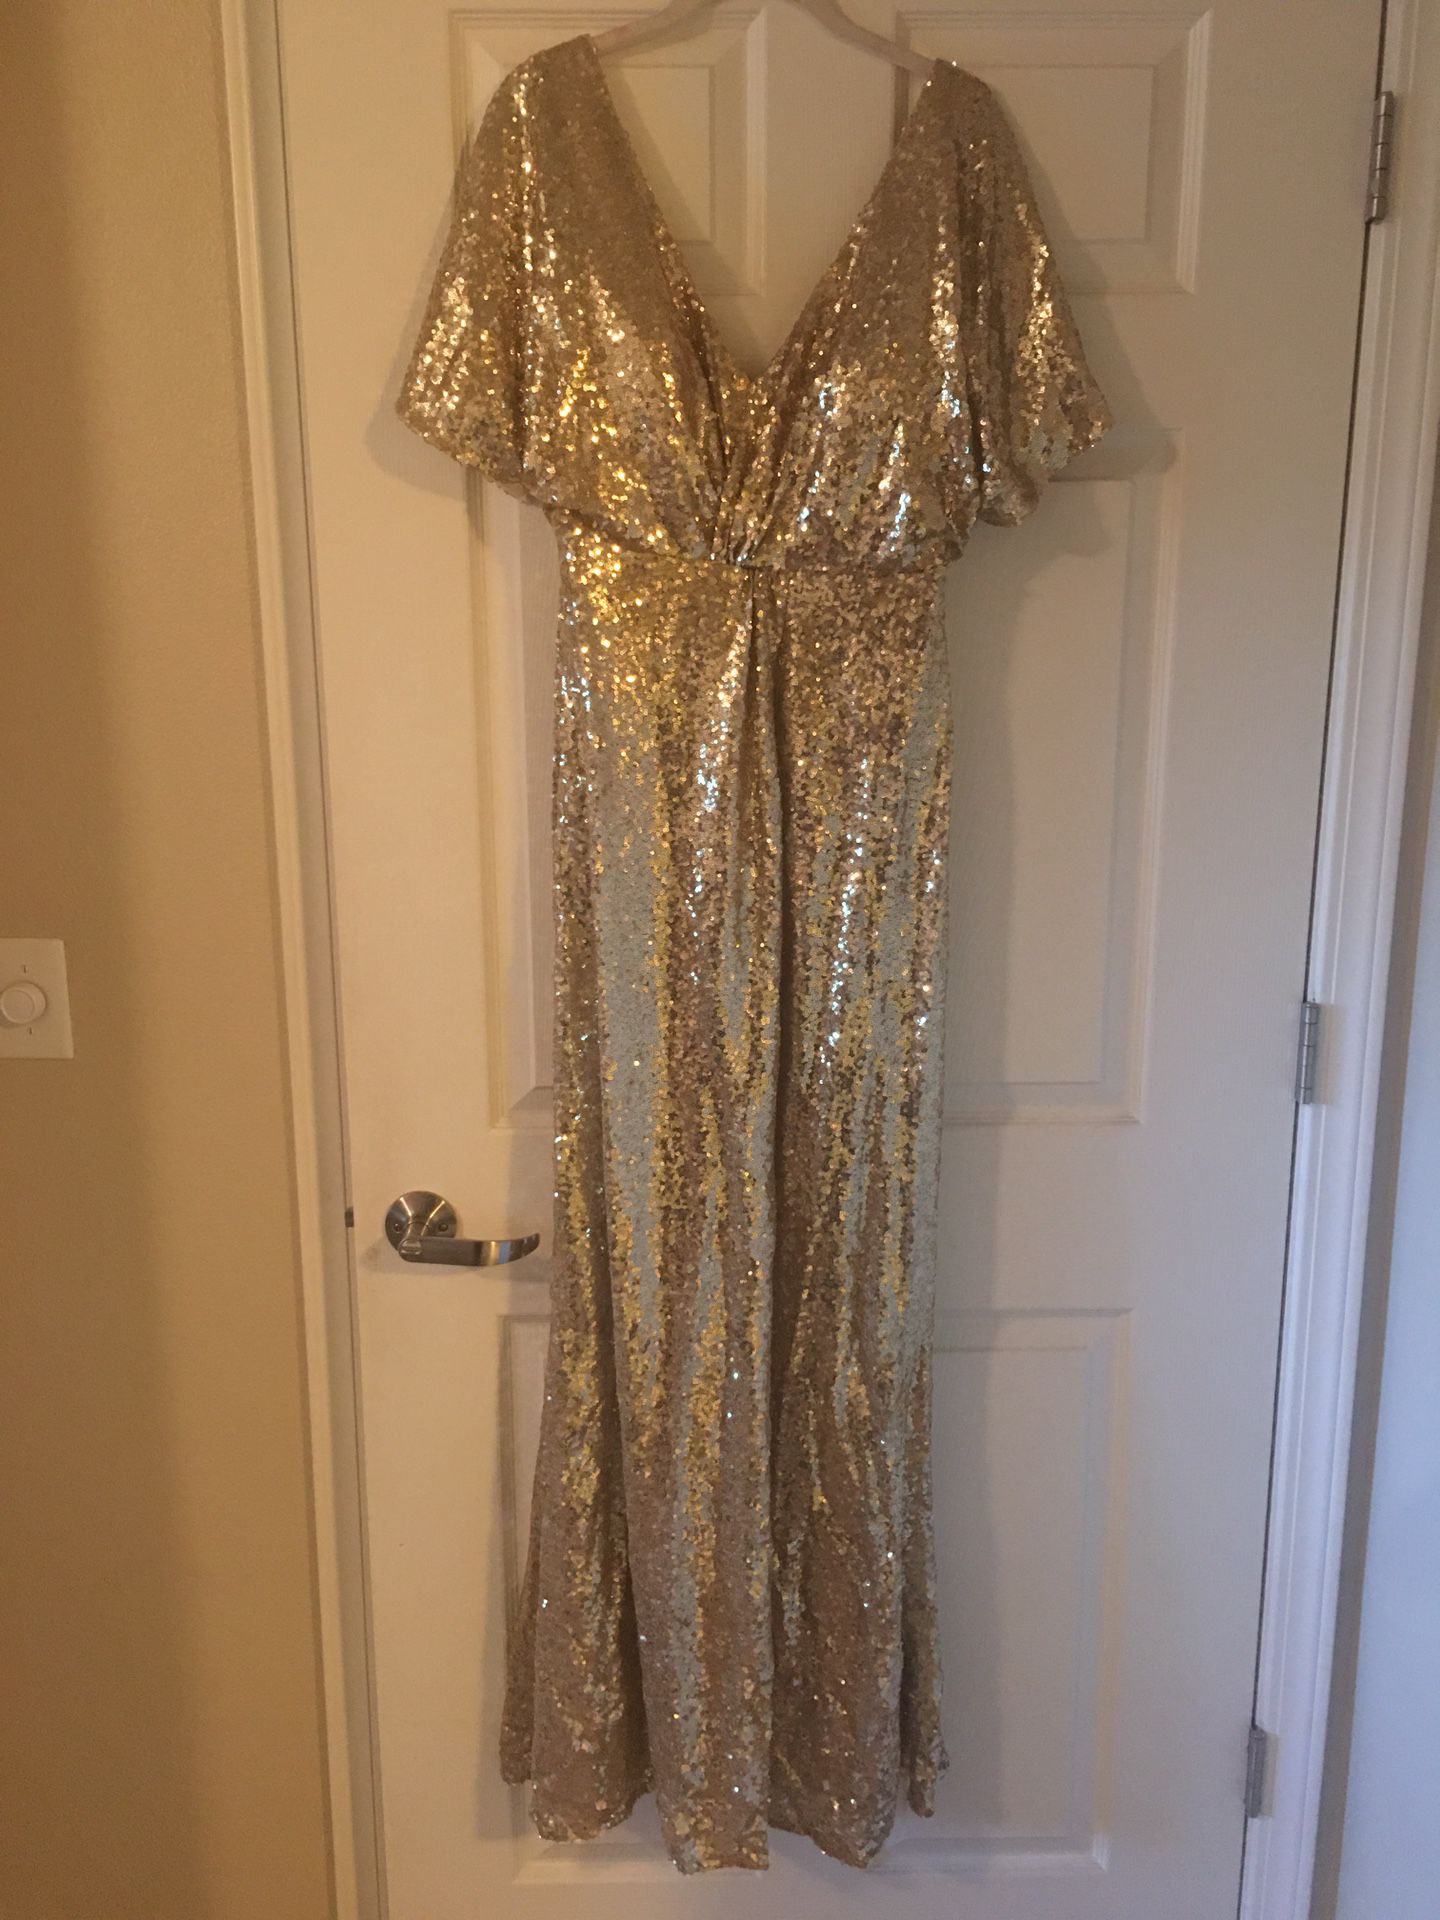 Revelry gold sequined Dress- Size 14 